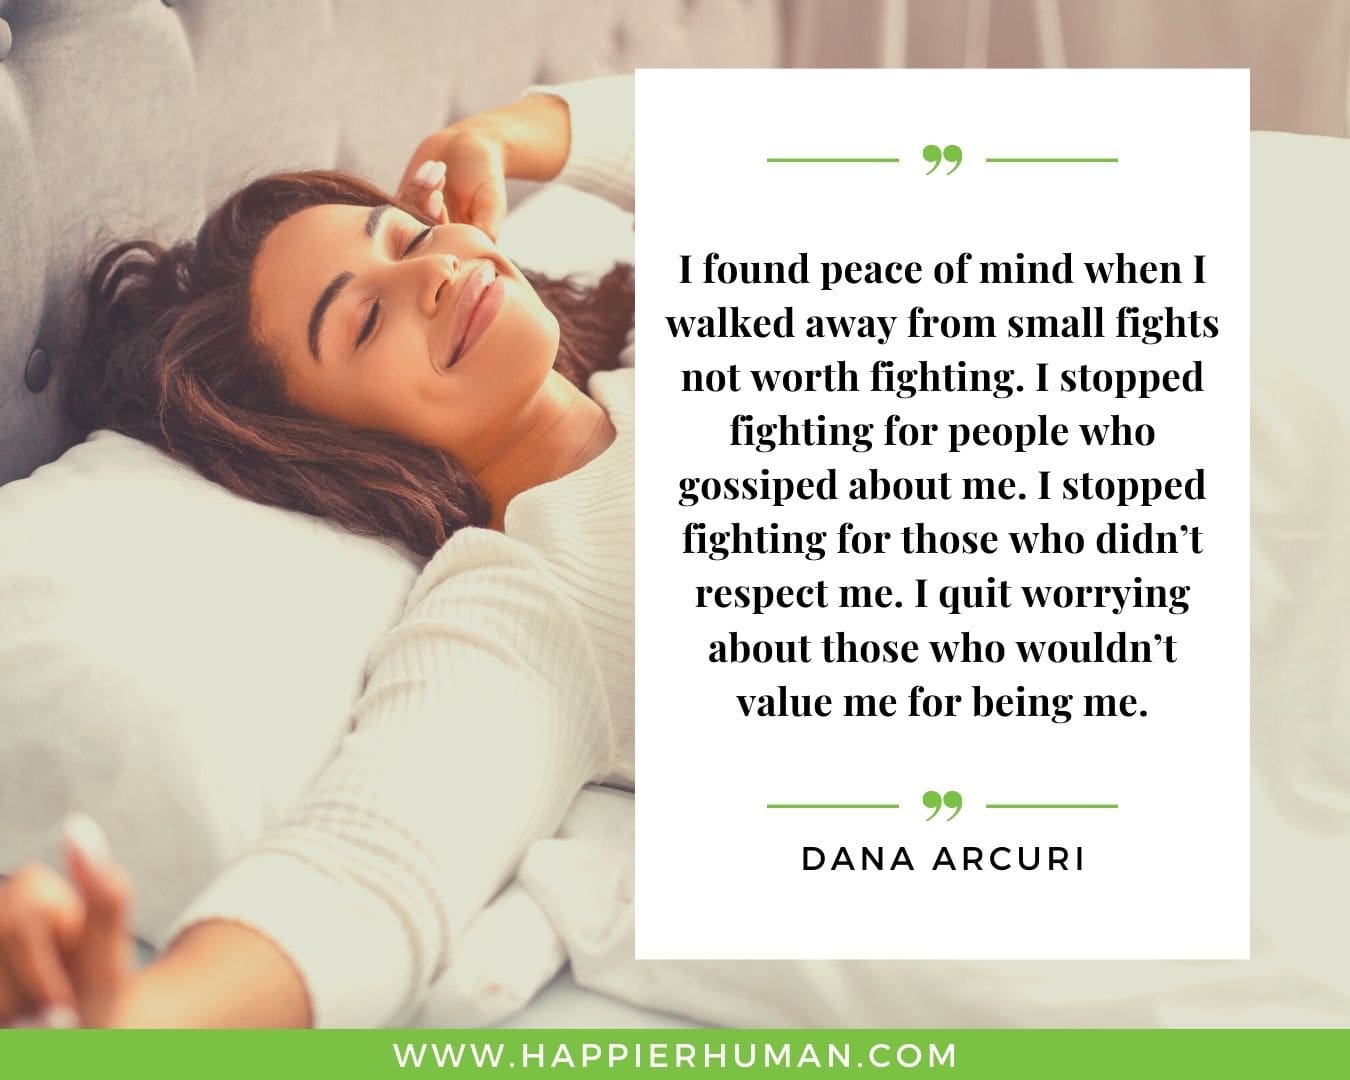 Toxic People Quotes - “I found peace of mind when I walked away from small fights not worth fighting. I stopped fighting for people who gossiped about me. I stopped fighting for those who didn’t respect me. I quit worrying about those who wouldn’t value me for being me.” – Dana Arcuri